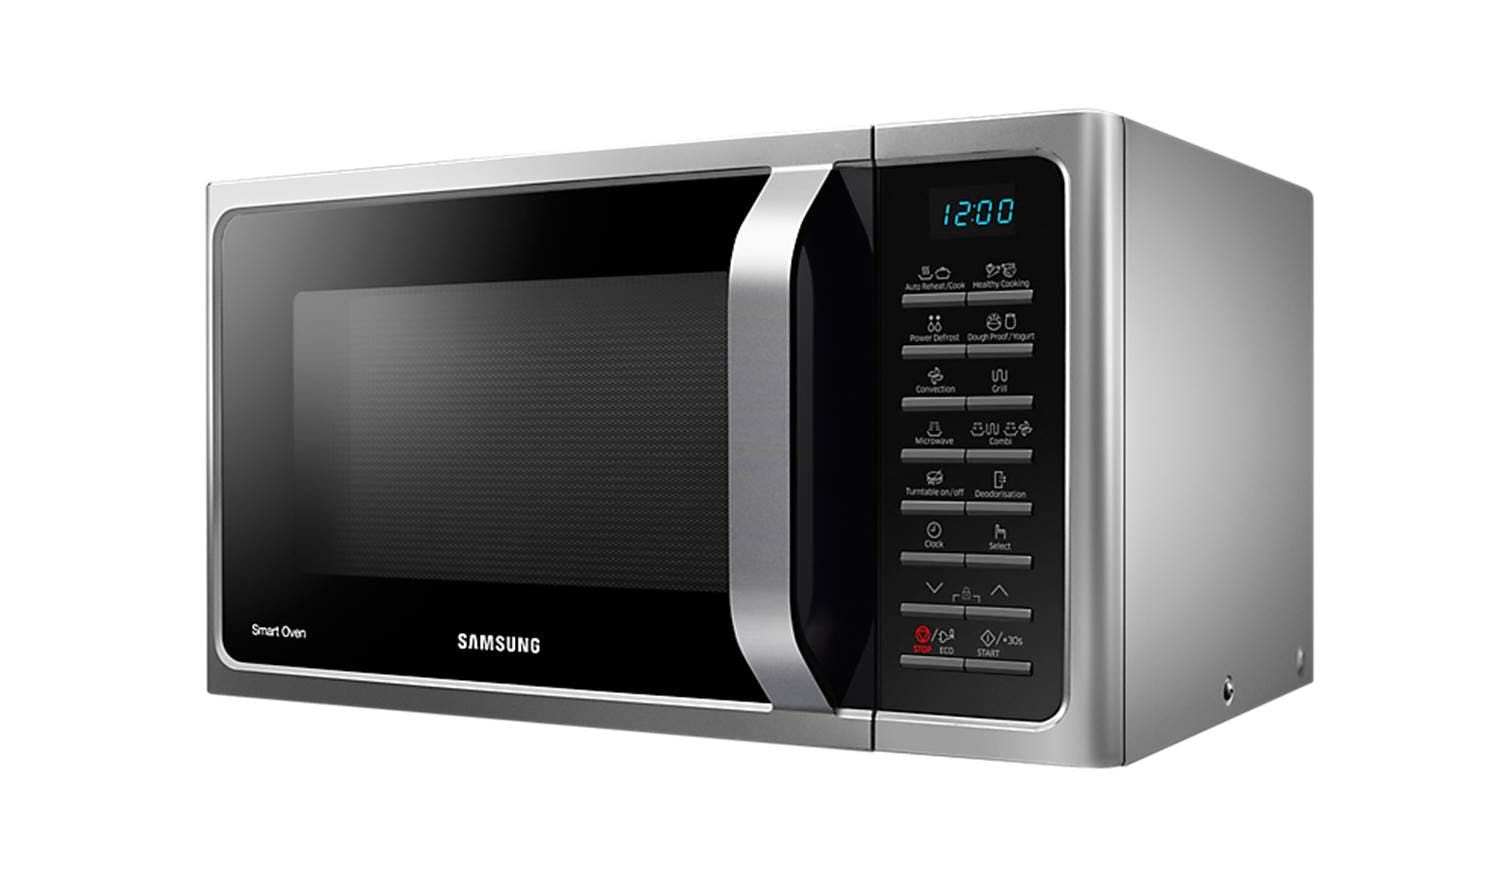 Samsung Microwave Oven with Grill and Convection 28Ltrs